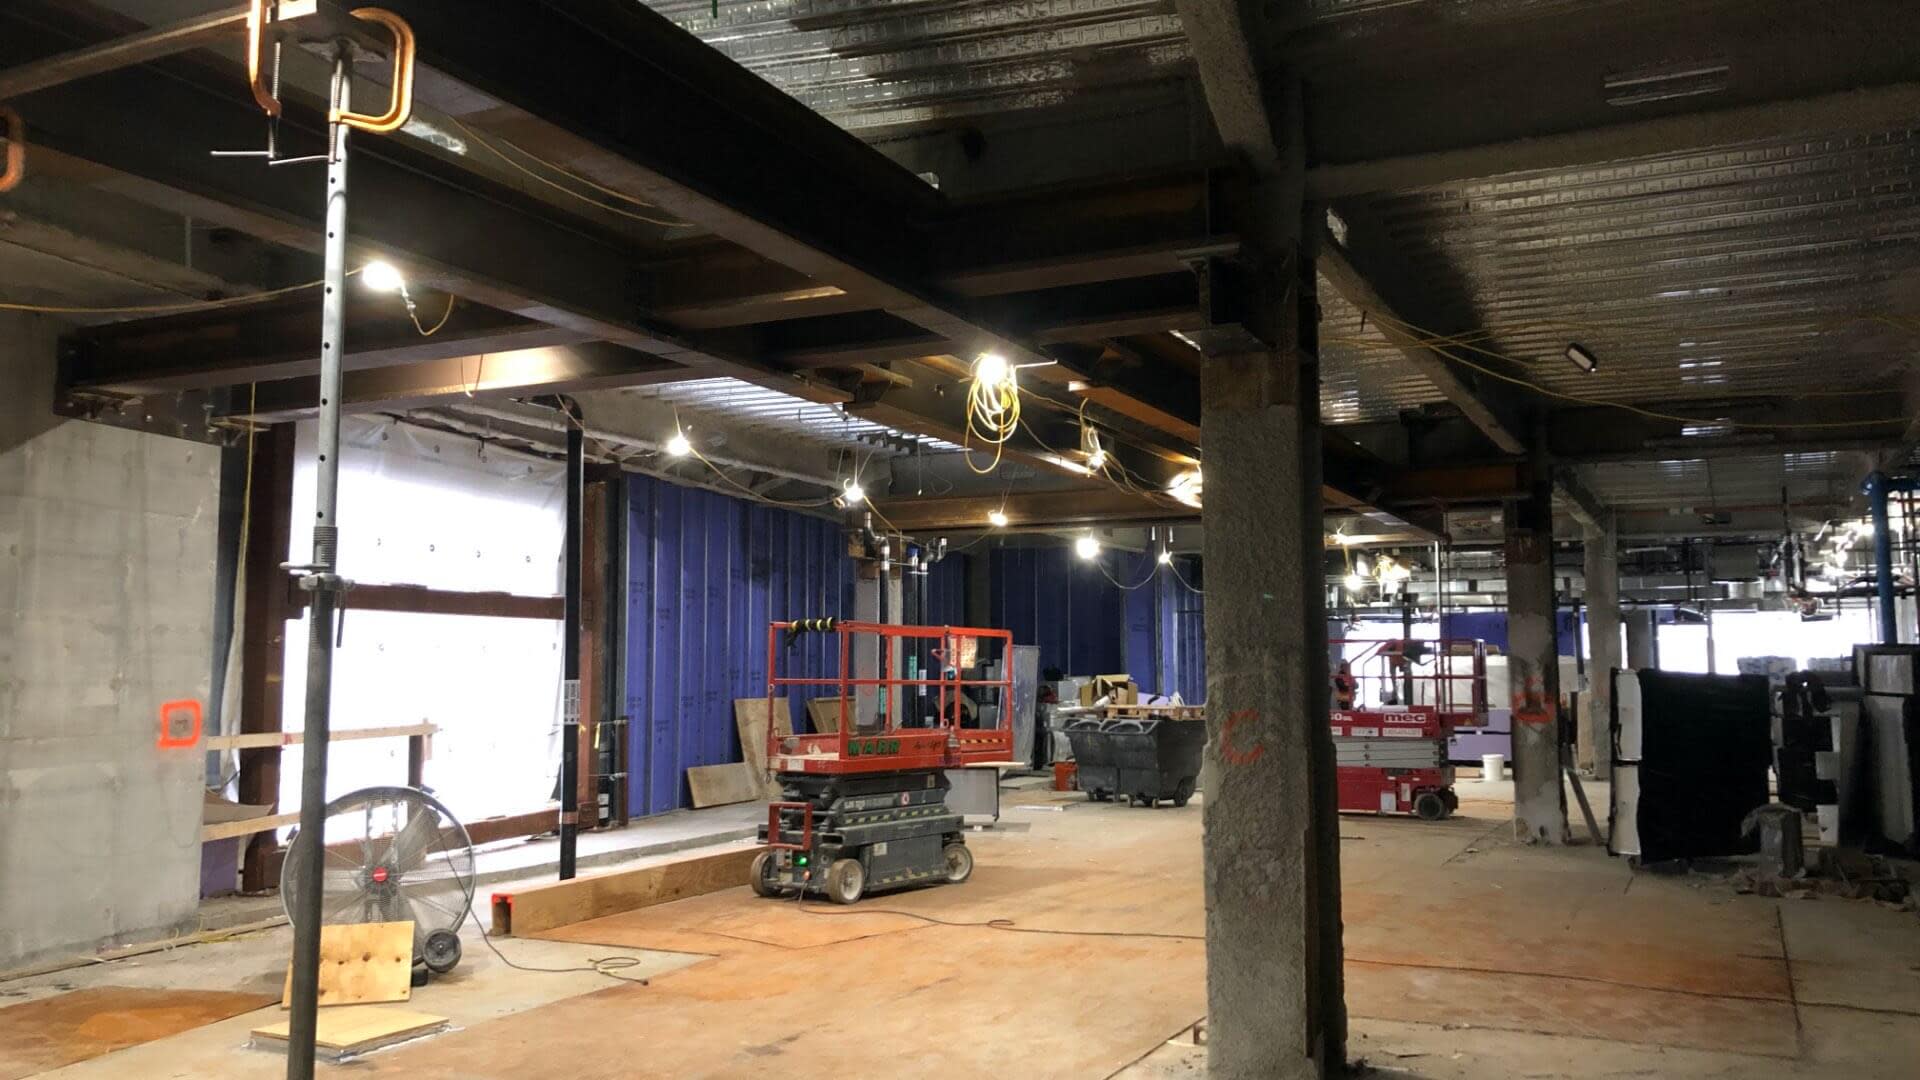 Interior of an under construction project with large metal beams